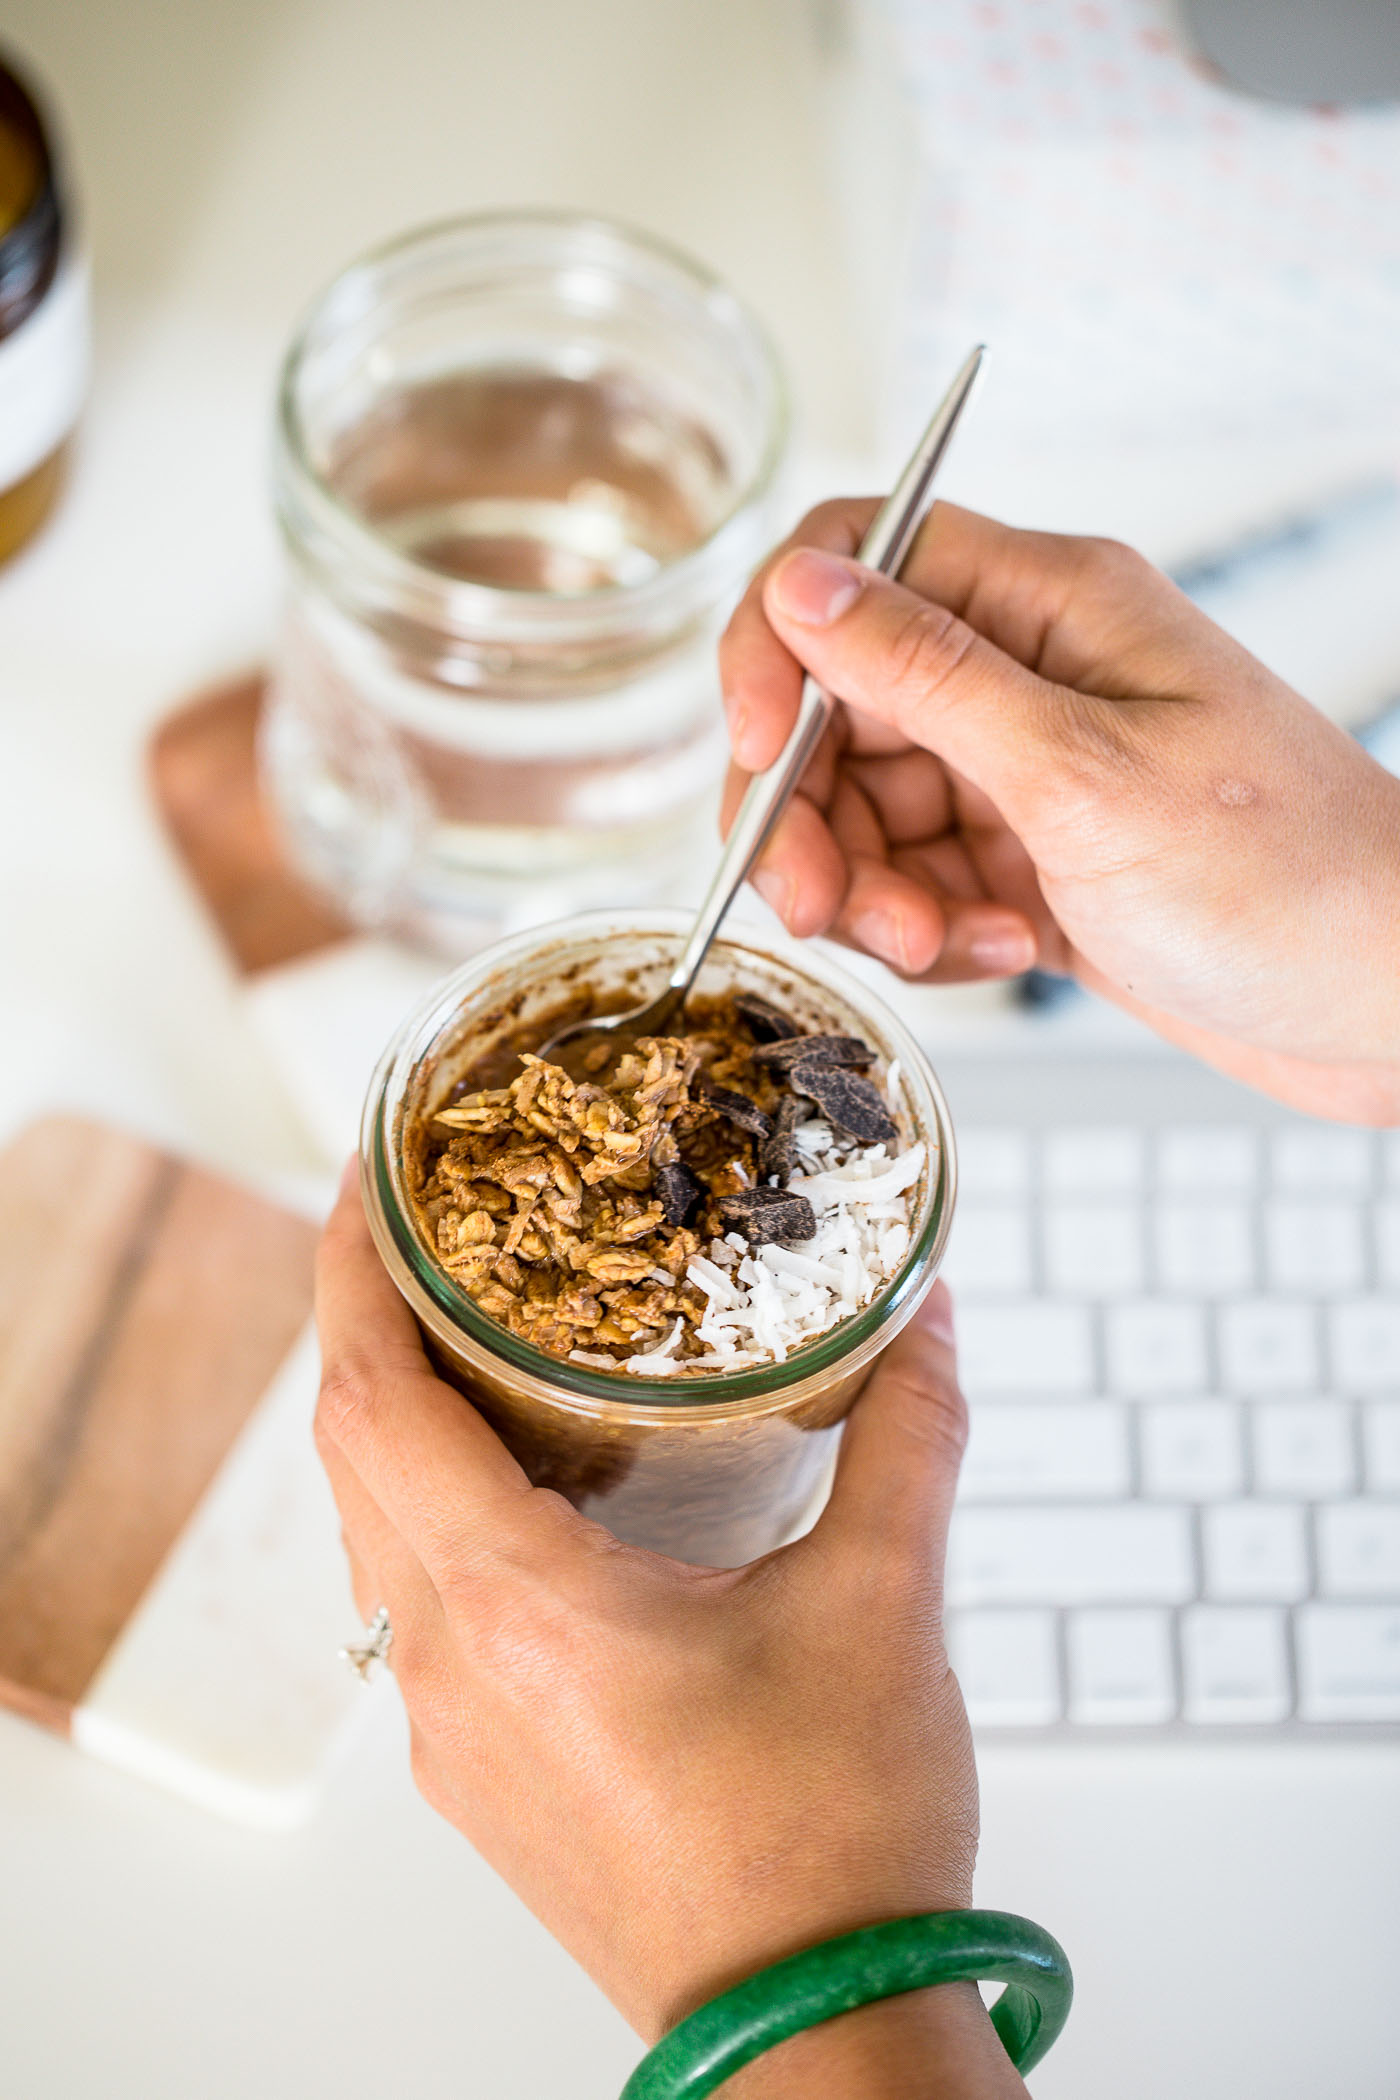 not your average overnight oats! these chocolate coconut cold brew overnight oats do double duty as a healthy on-the-go breakfast & a jolt of caffeine! #playswellwithbutter #coldbrew #overnightoats #healthybreakfast #breakfastrecipe #easybreakfast #oatmeal